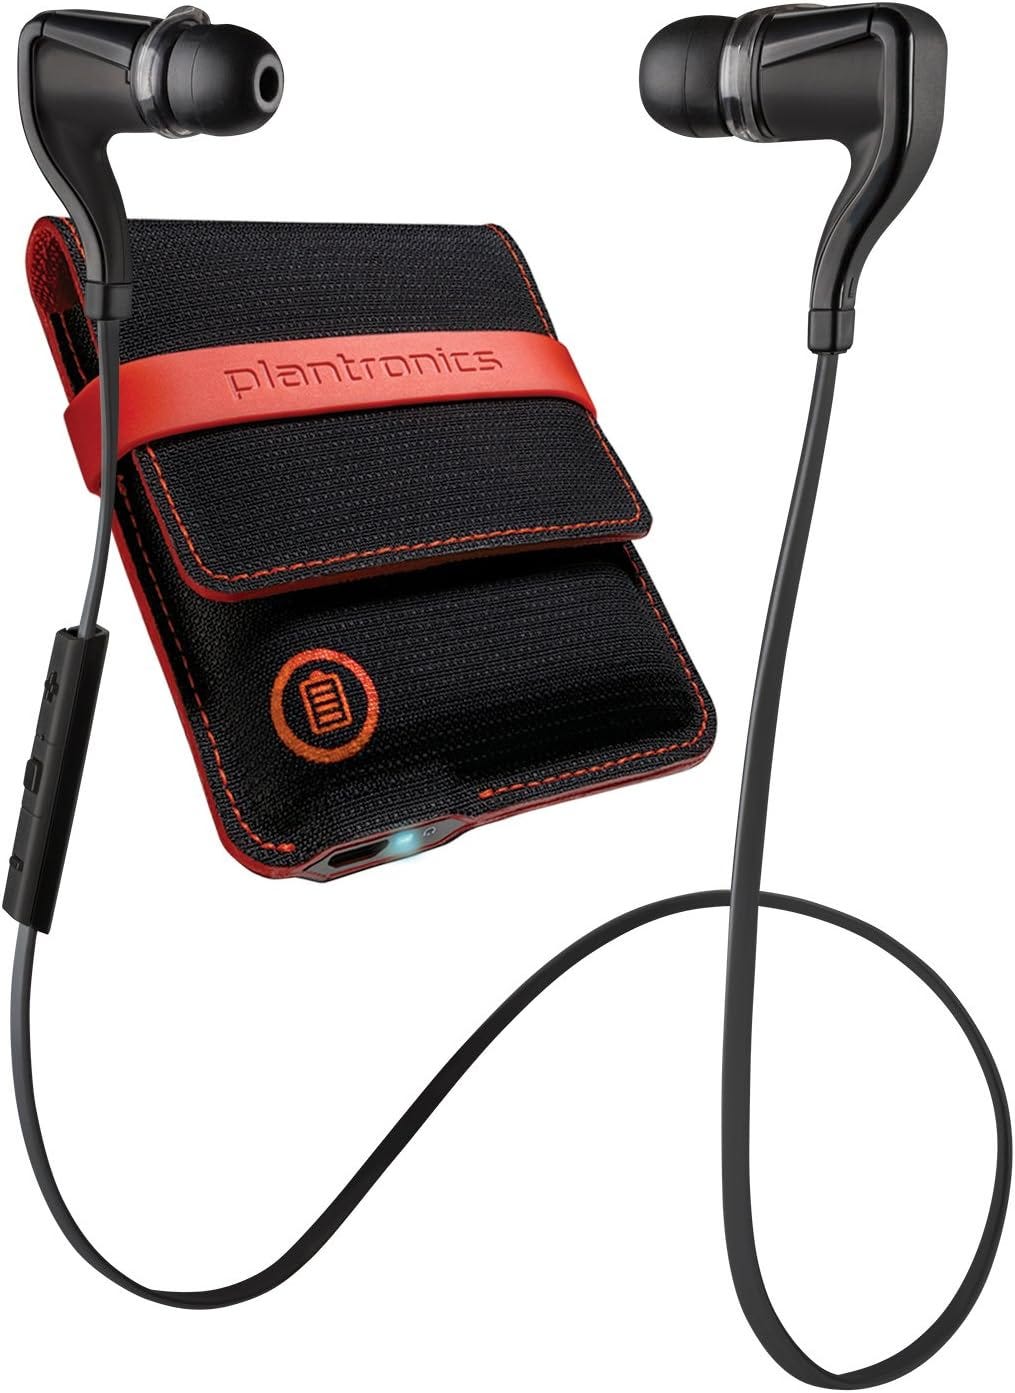 Best running earbuds:Plantronics backbeat go 2 review | by Author | Medium